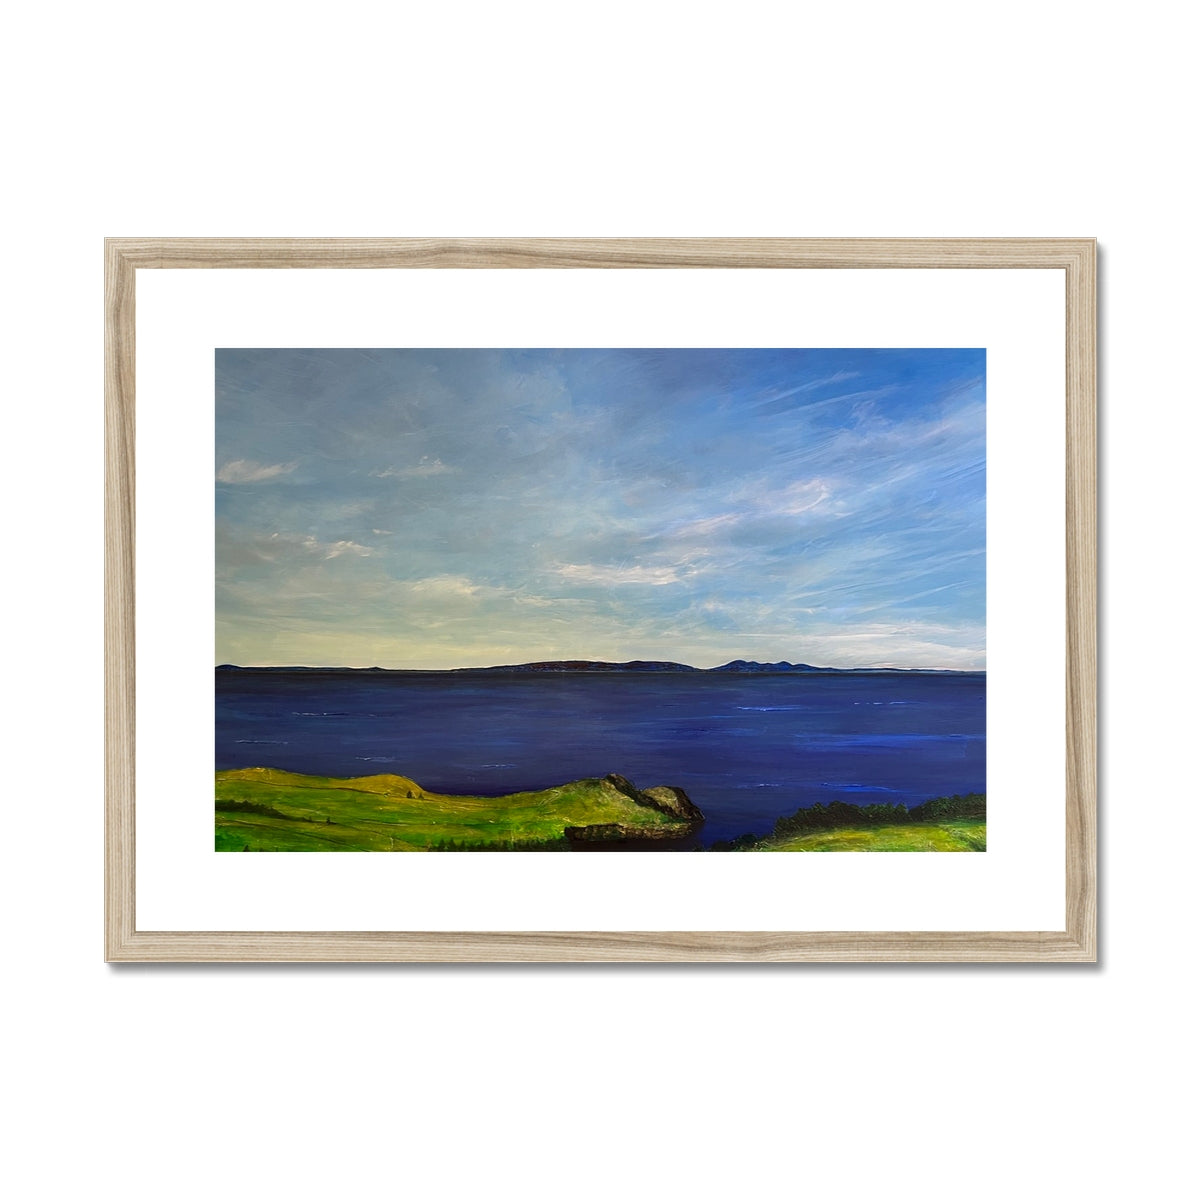 From Ireland To Scotland Painting | Framed & Mounted Prints From Scotland-Framed & Mounted Prints-World Art Gallery-A2 Landscape-Natural Frame-Paintings, Prints, Homeware, Art Gifts From Scotland By Scottish Artist Kevin Hunter